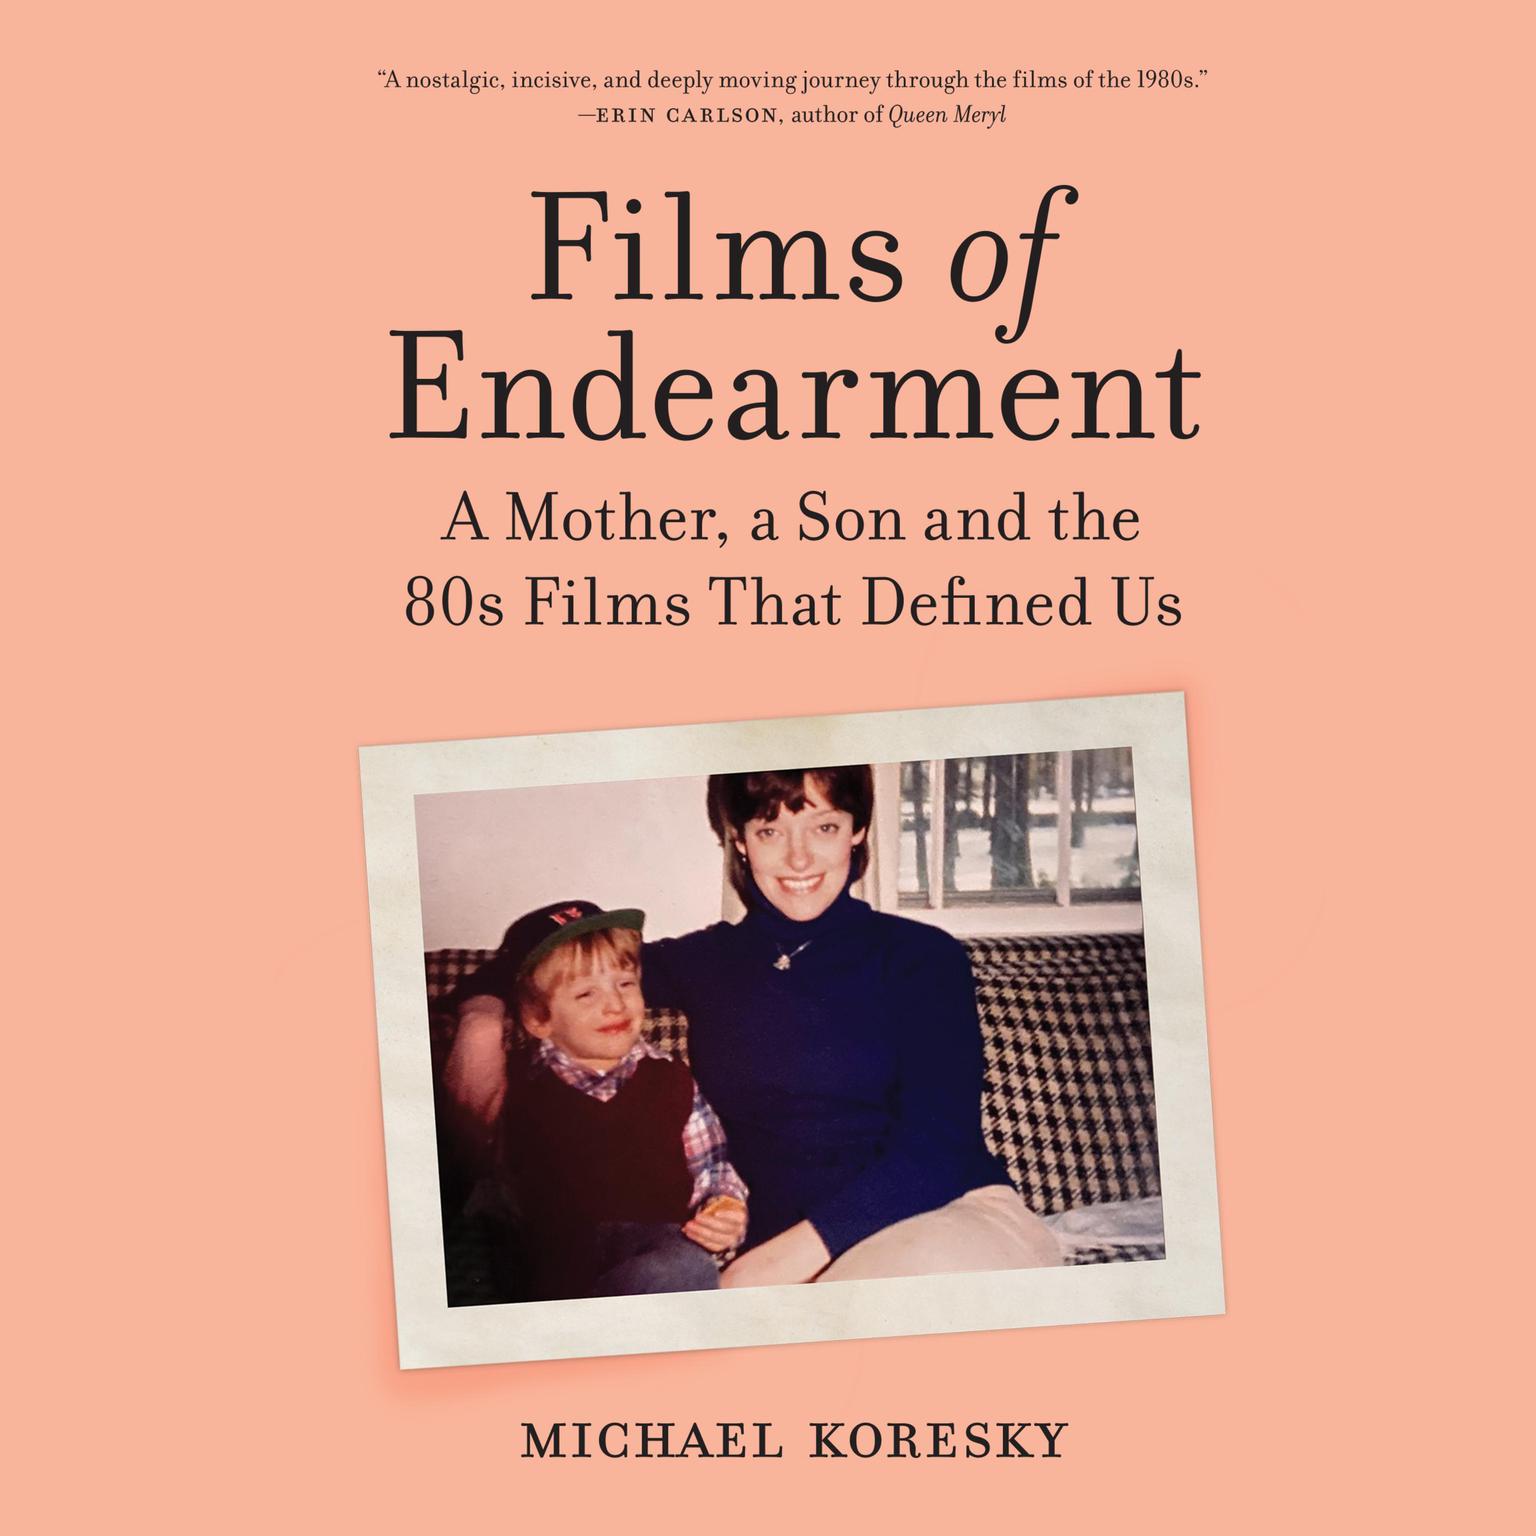 Films of Endearment: A Mother, a Son and the 80s Films That Defined Us Audiobook, by Michael Koresky